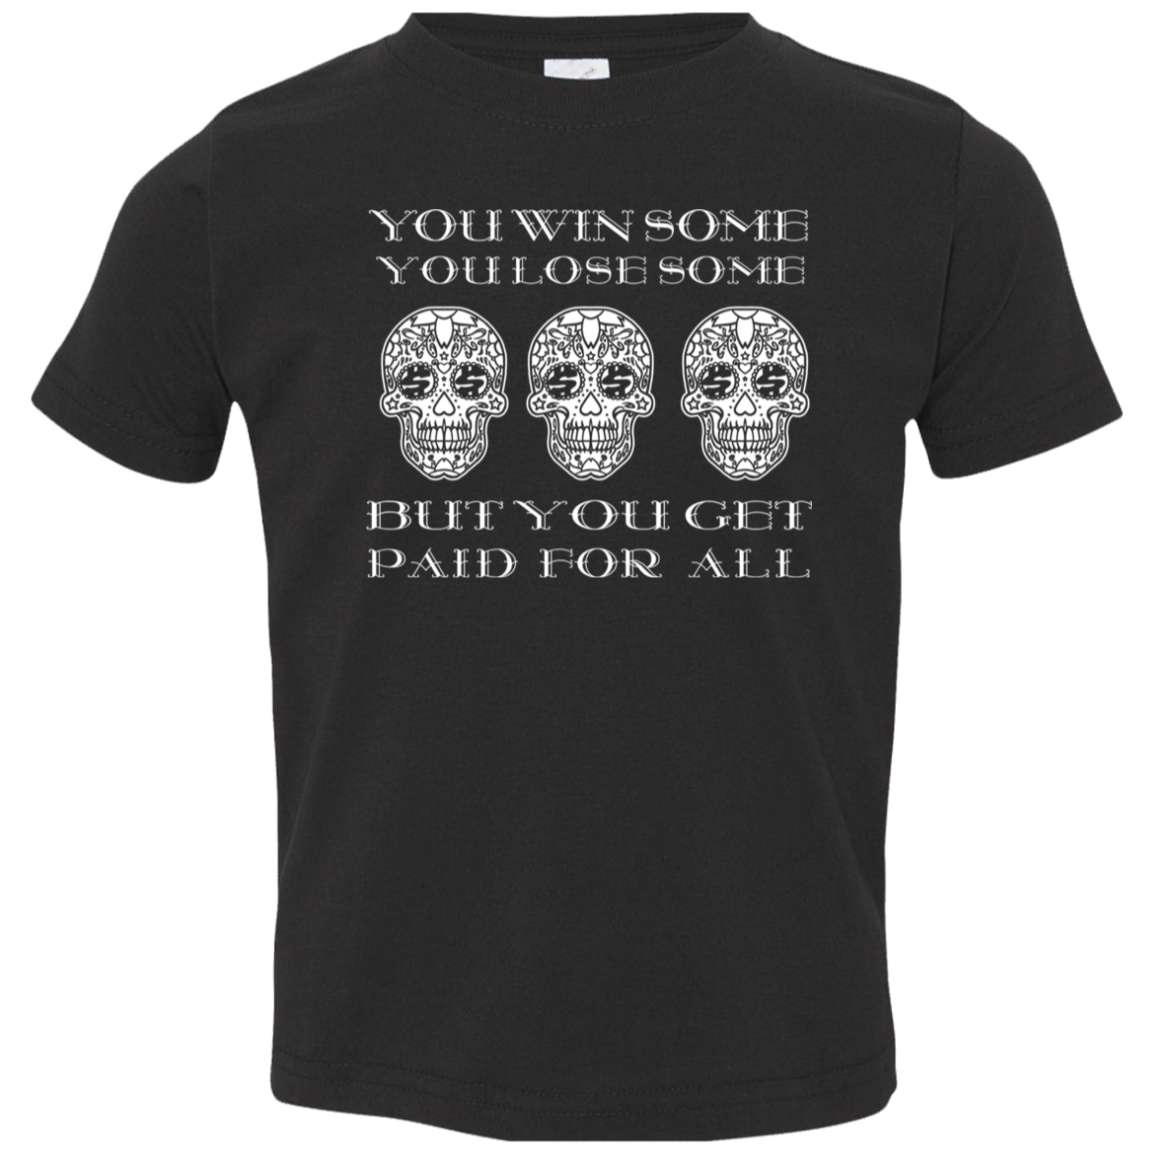 ArtichokeUSA Custom Design. You Win Some, You Lose Some, But You Get Paid For All. Toddler Jersey T-Shirt